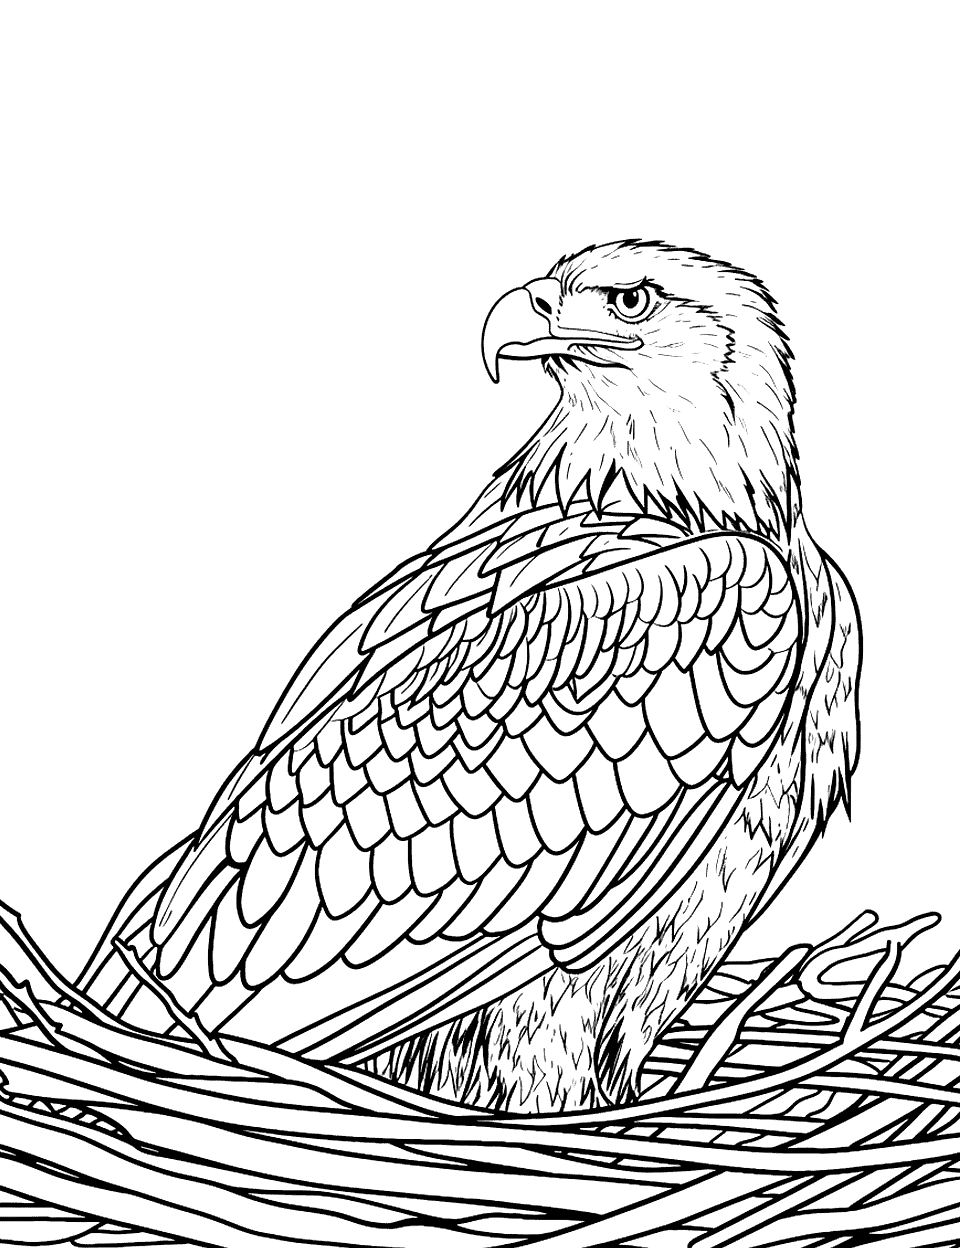 Young Eagle in the Nest Coloring Page - A juvenile eagle stands in a large nest made of sticks, looking curiously at the surrounding simple treetops.